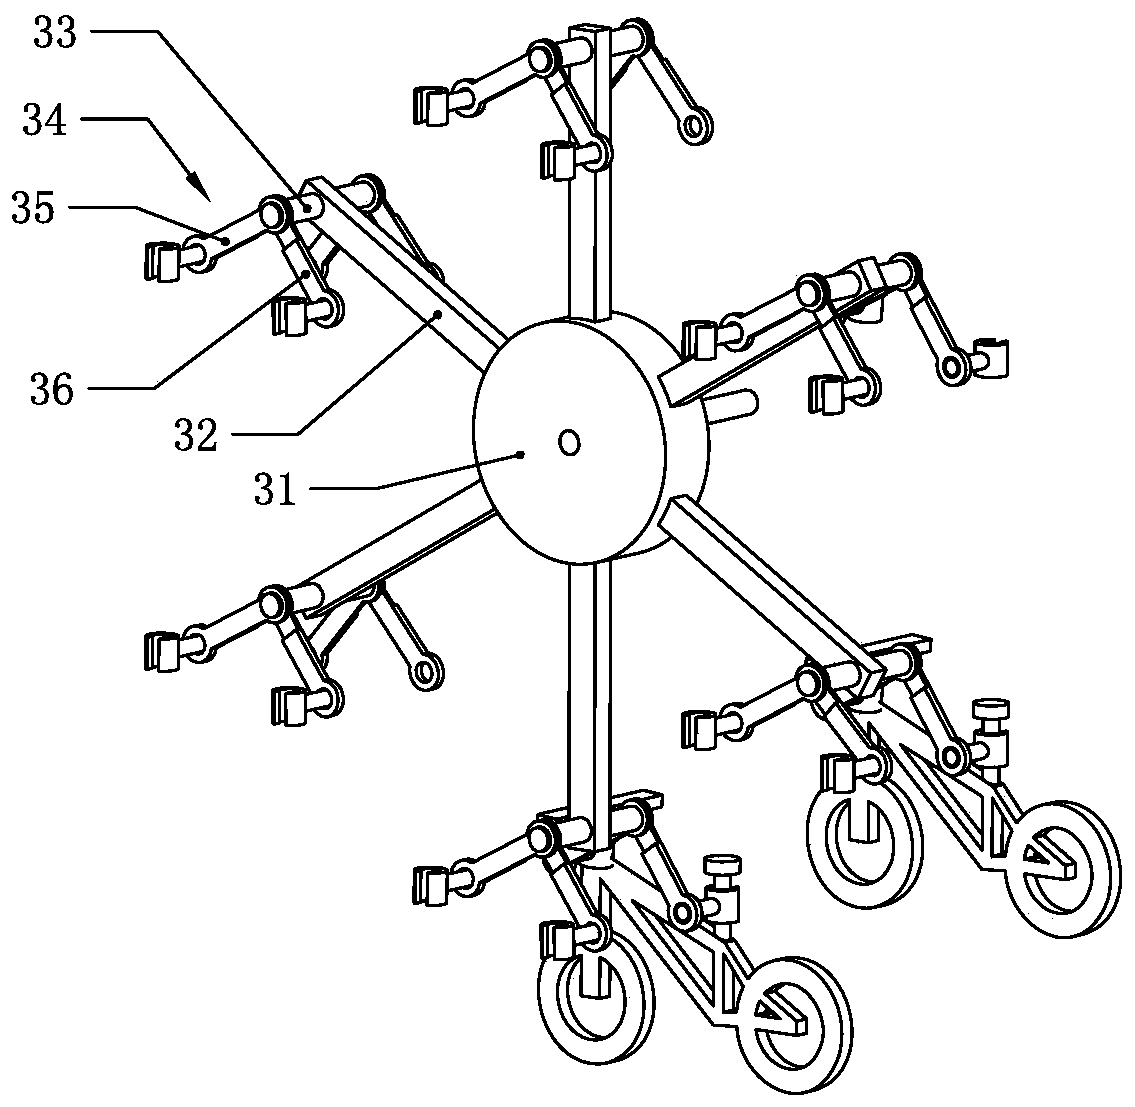 A solar multi-faceted rotating three-dimensional bicycle parking device